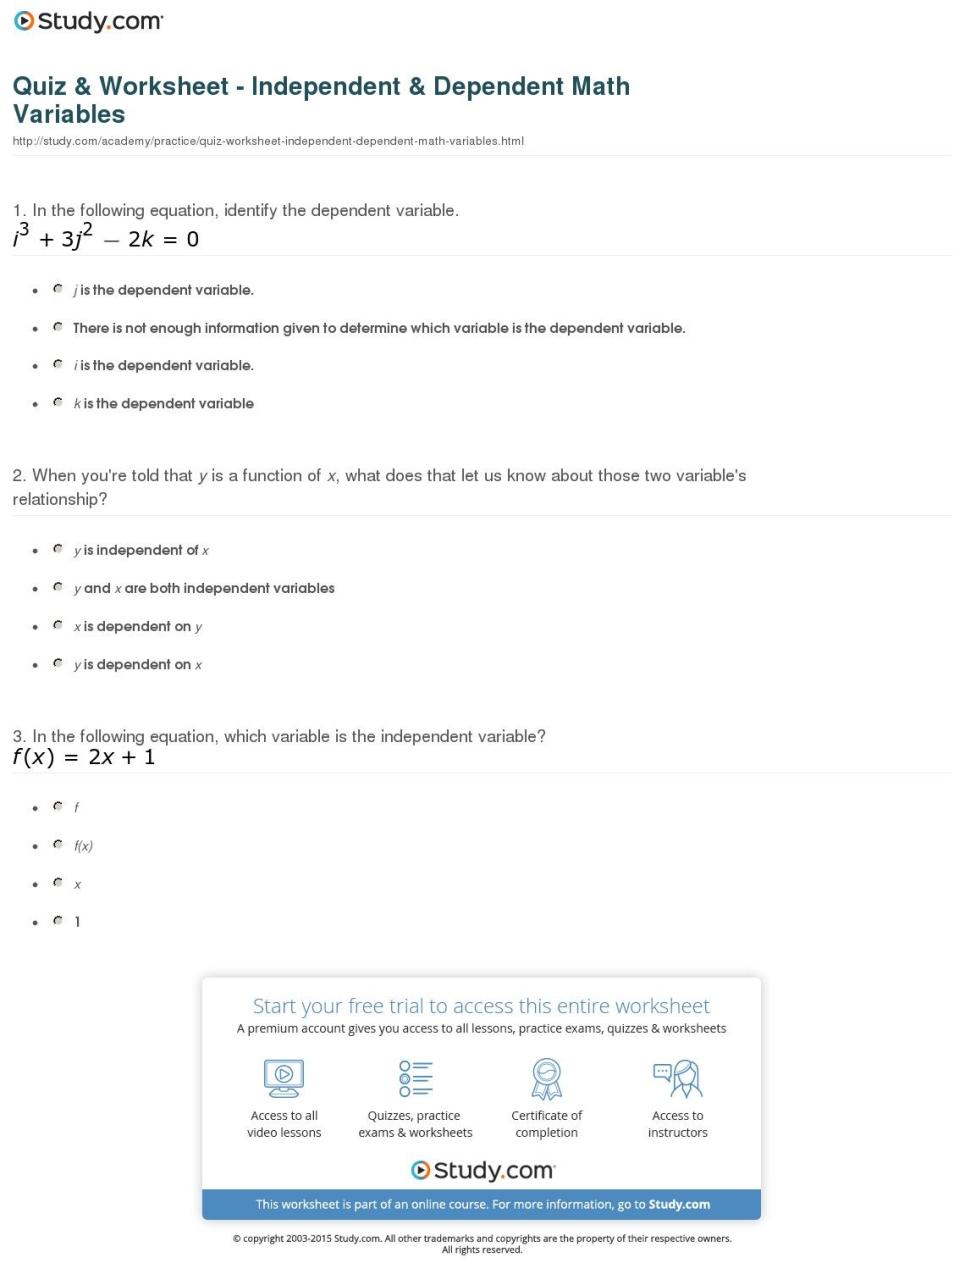 Adding And Subtracting Polynomials Worksheet Doc